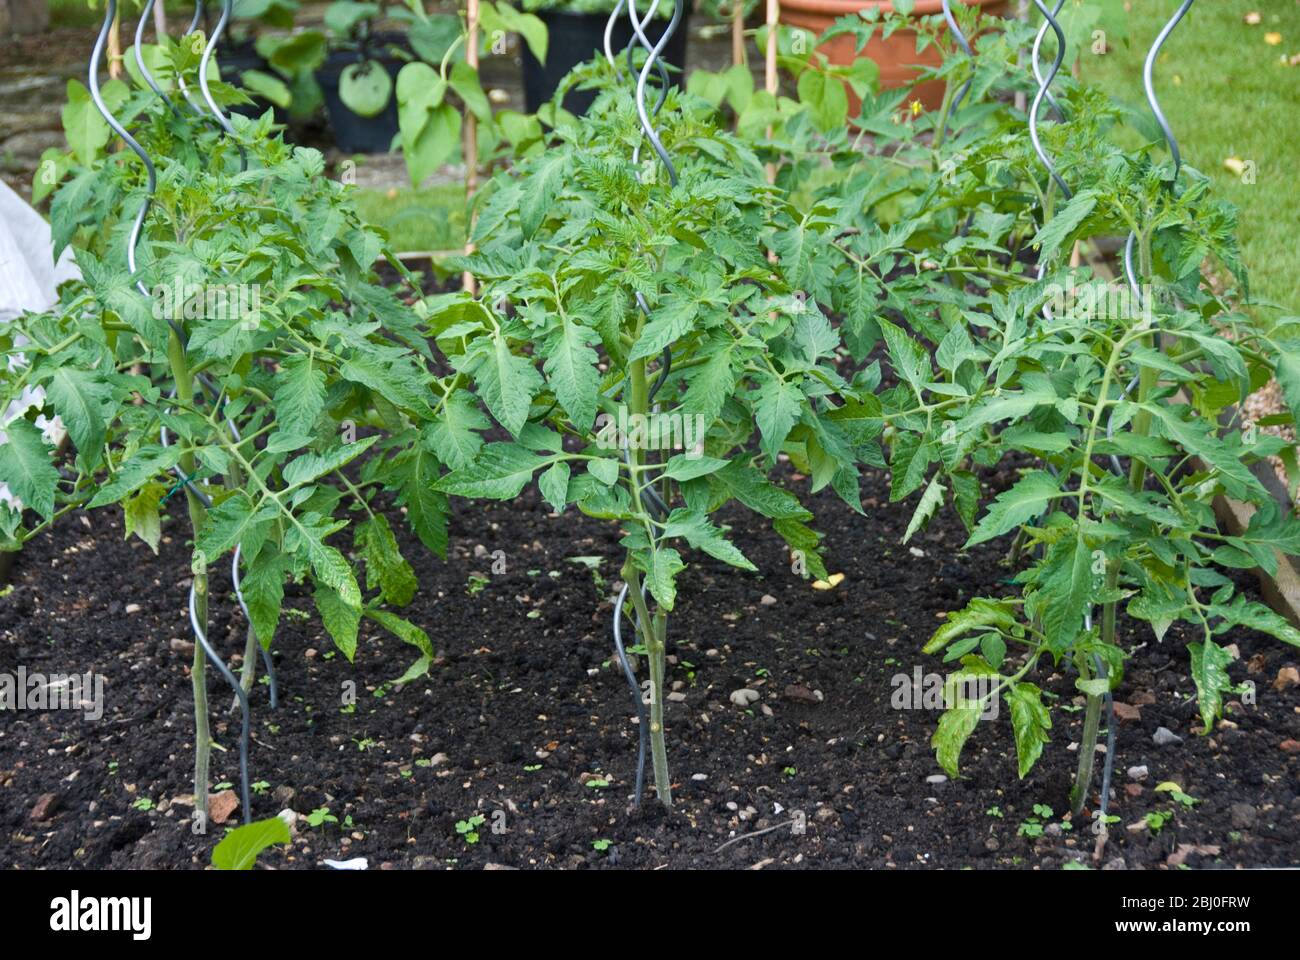 Tomato plants growing with the support of modern curly metal poles in garden raised bed. - Stock Photo